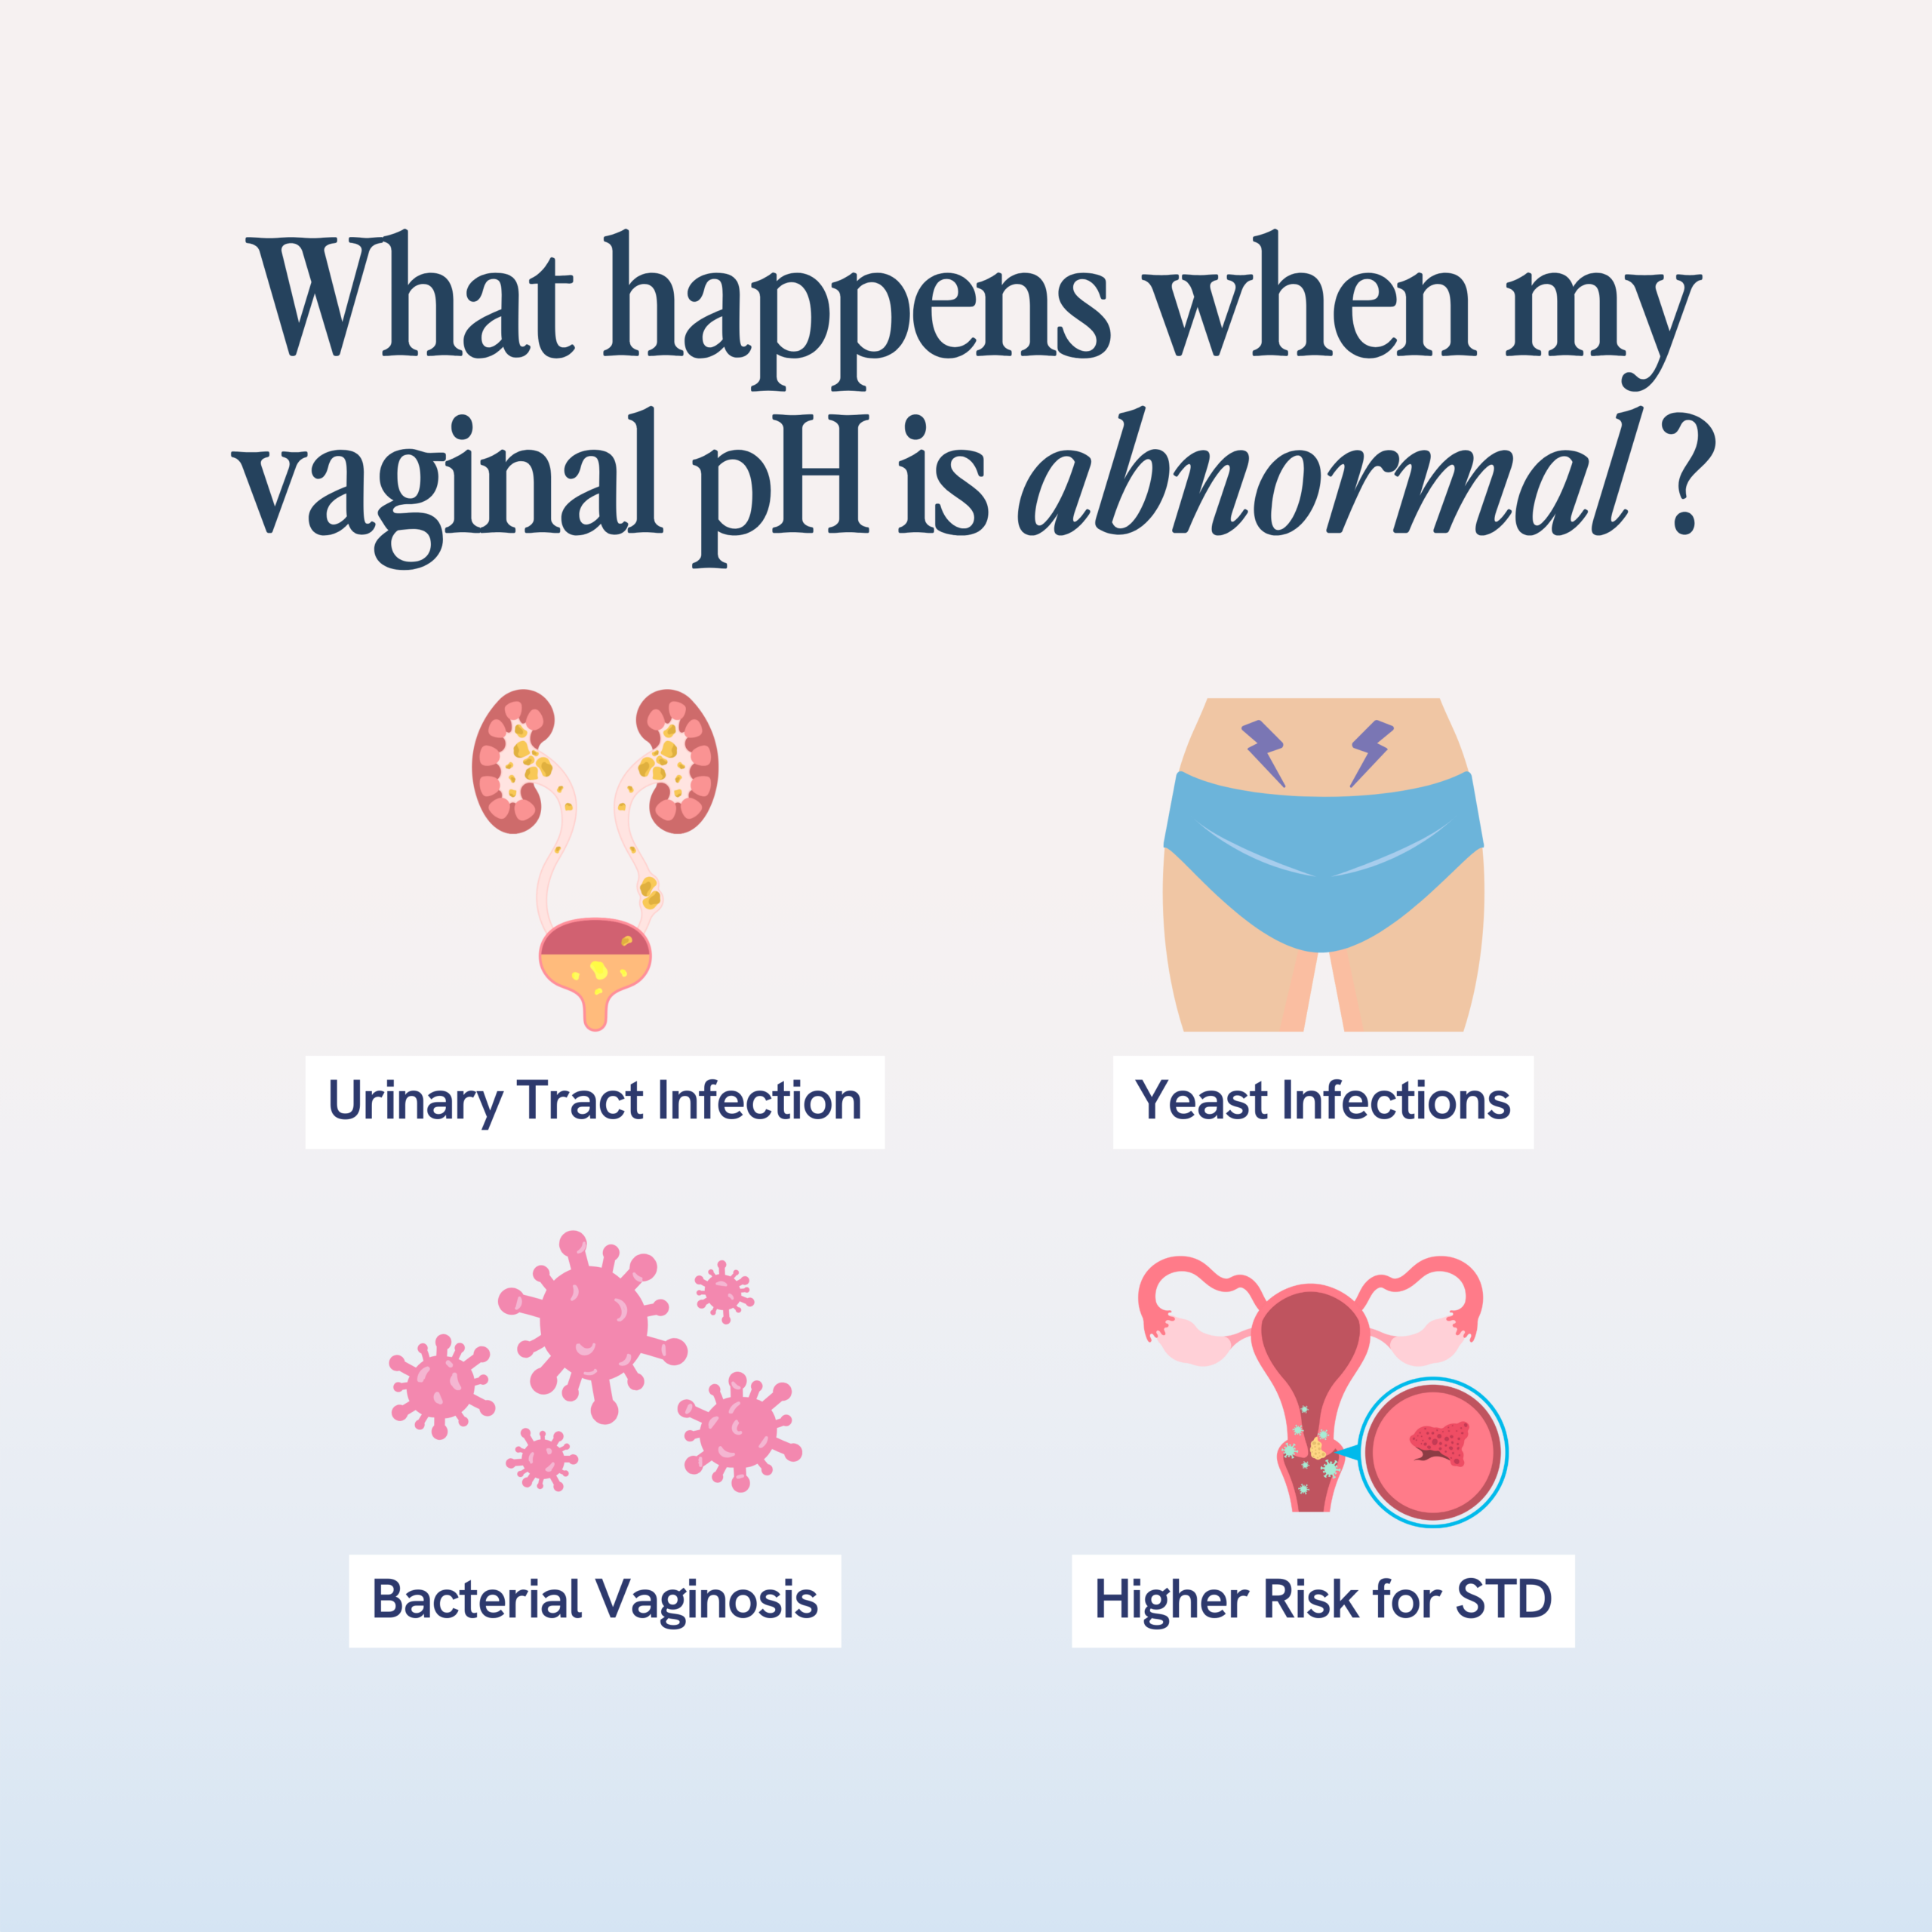 This image is an educational graphic that illustrates the consequences of an abnormal vaginal pH level. Icons representing Urinary Tract Infection, Yeast Infections, Bacterial Vaginosis, and a higher risk for STDs surround the central title text, suggesting these are conditions that can arise from an imbalanced pH level in the vaginal environment.






